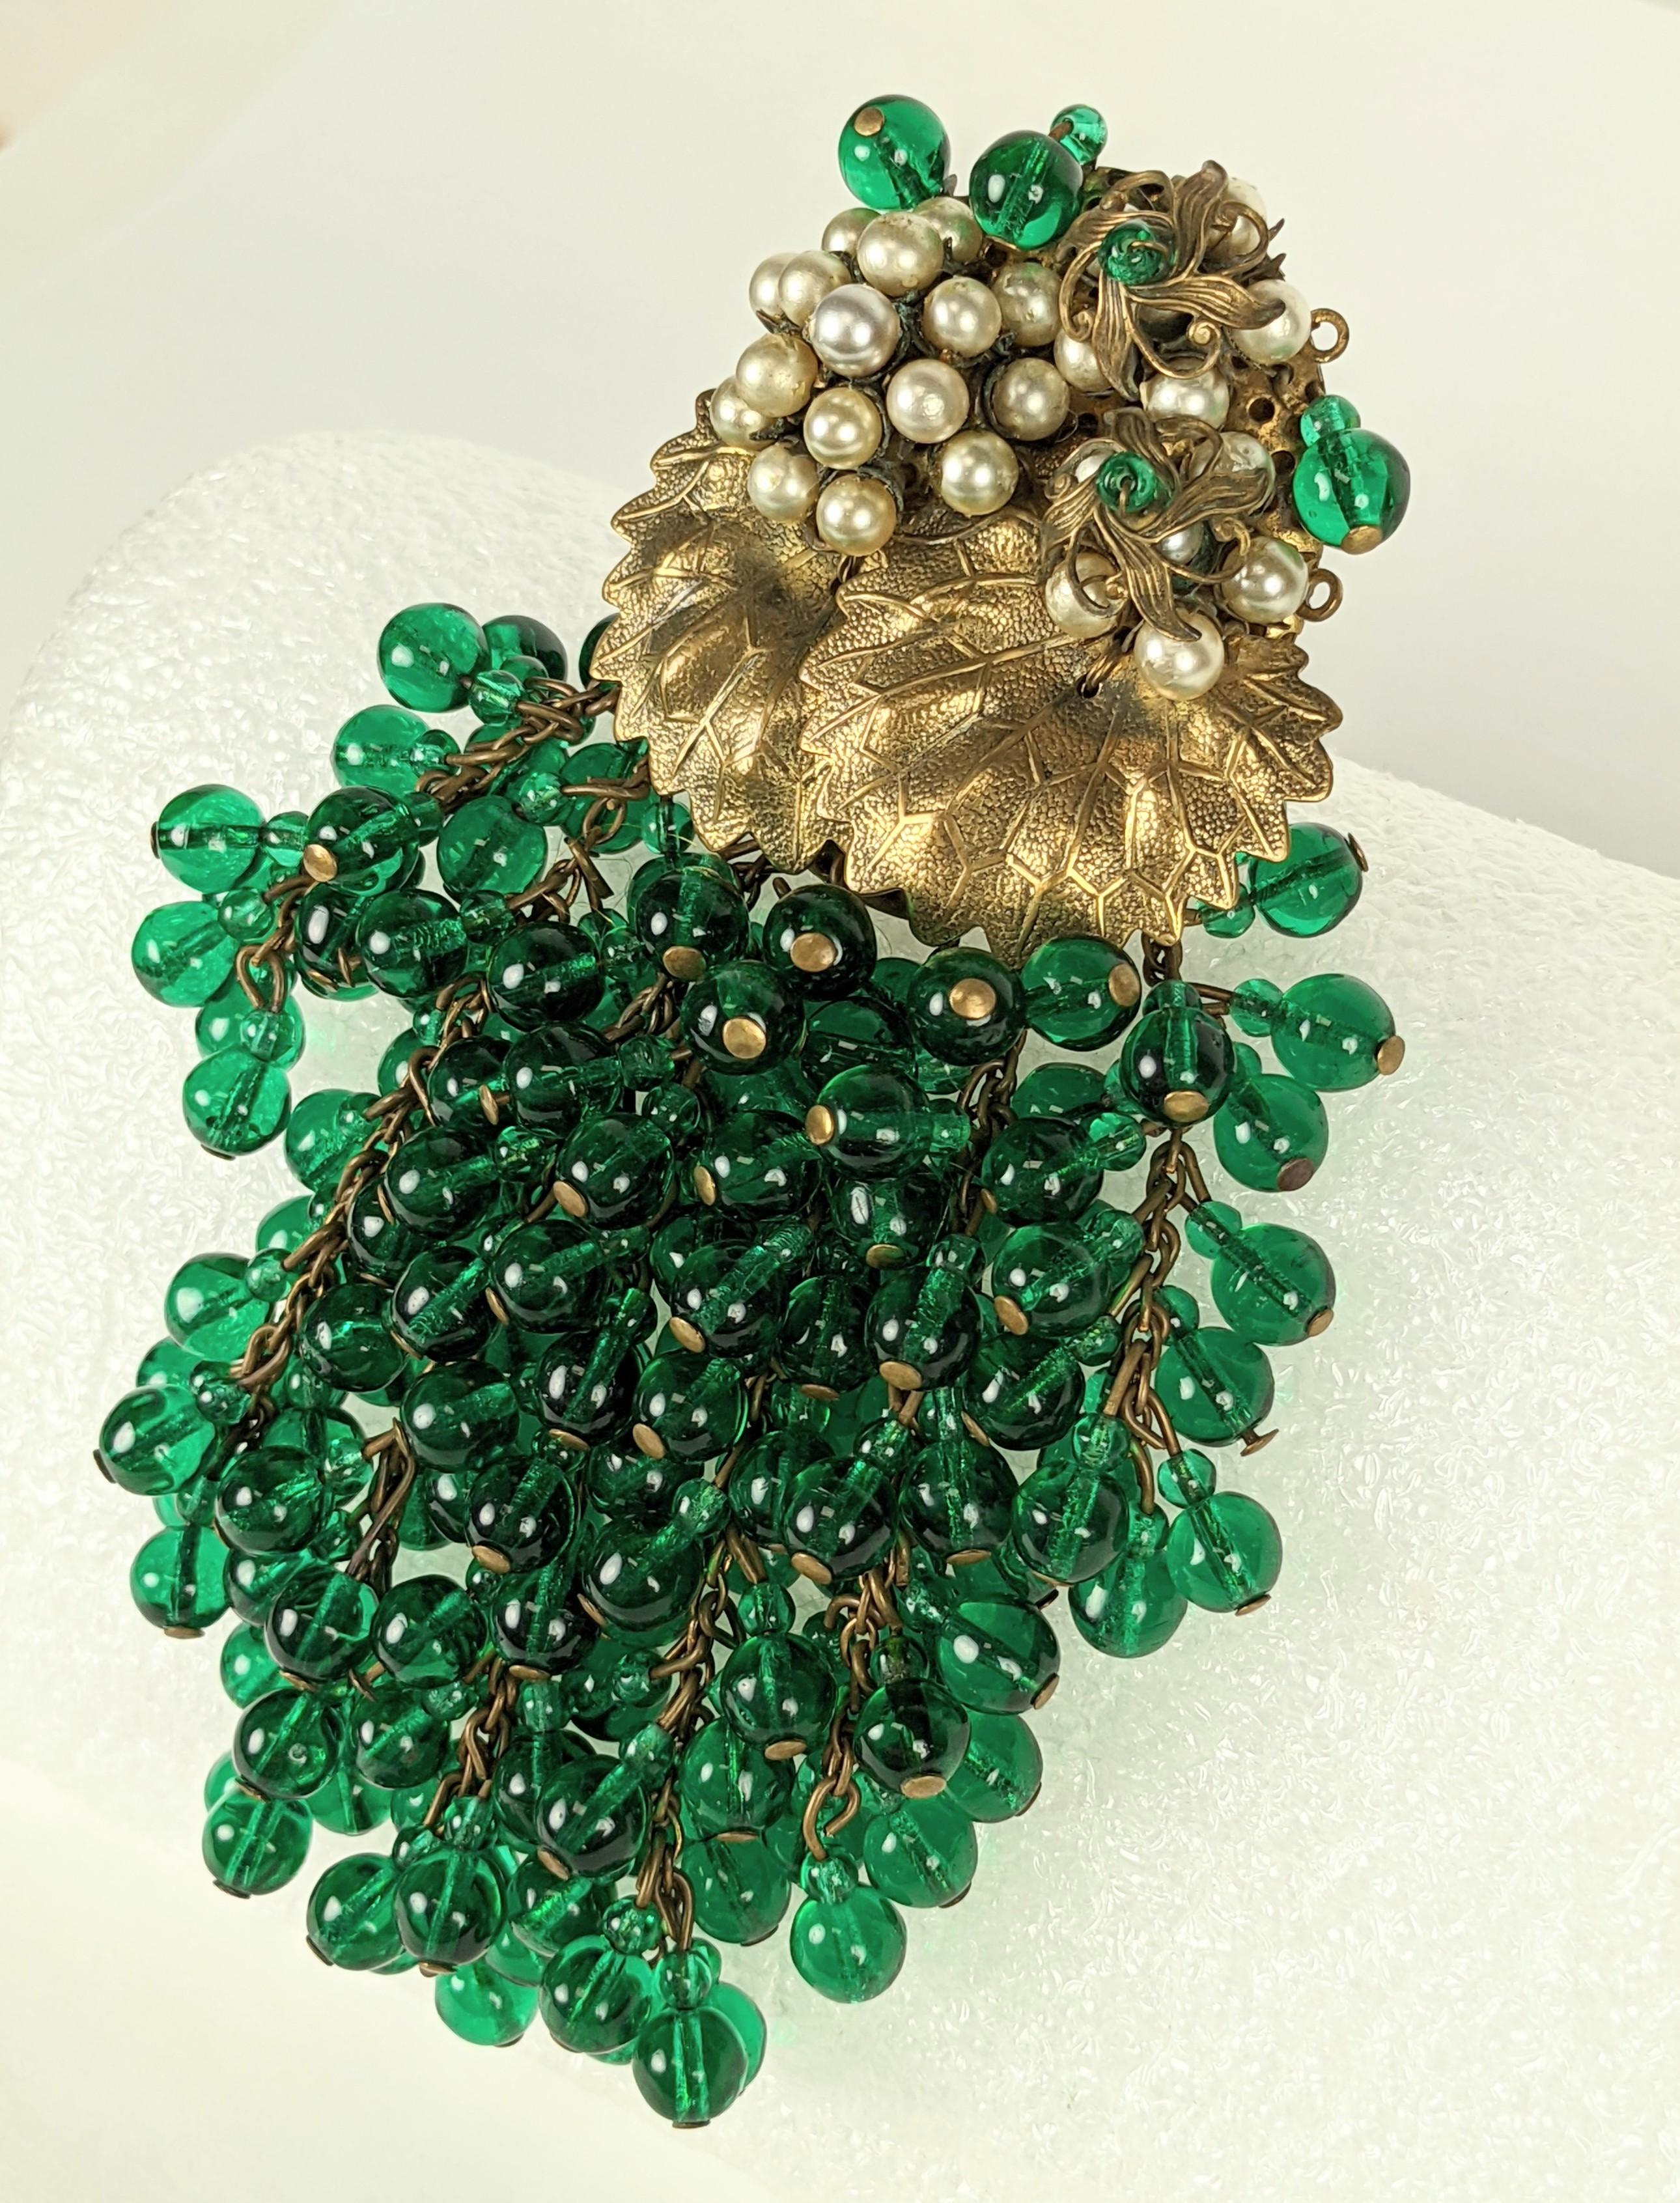 Super large Miriam Haskell Early Green Cluster Bead Clip/Brooch from the 1930's. Clusters of green grape beads fall from brass leaves embroidered with faux pearls and more green beads. 
Early pieces are unsigned as is this one. Clip back fitting for